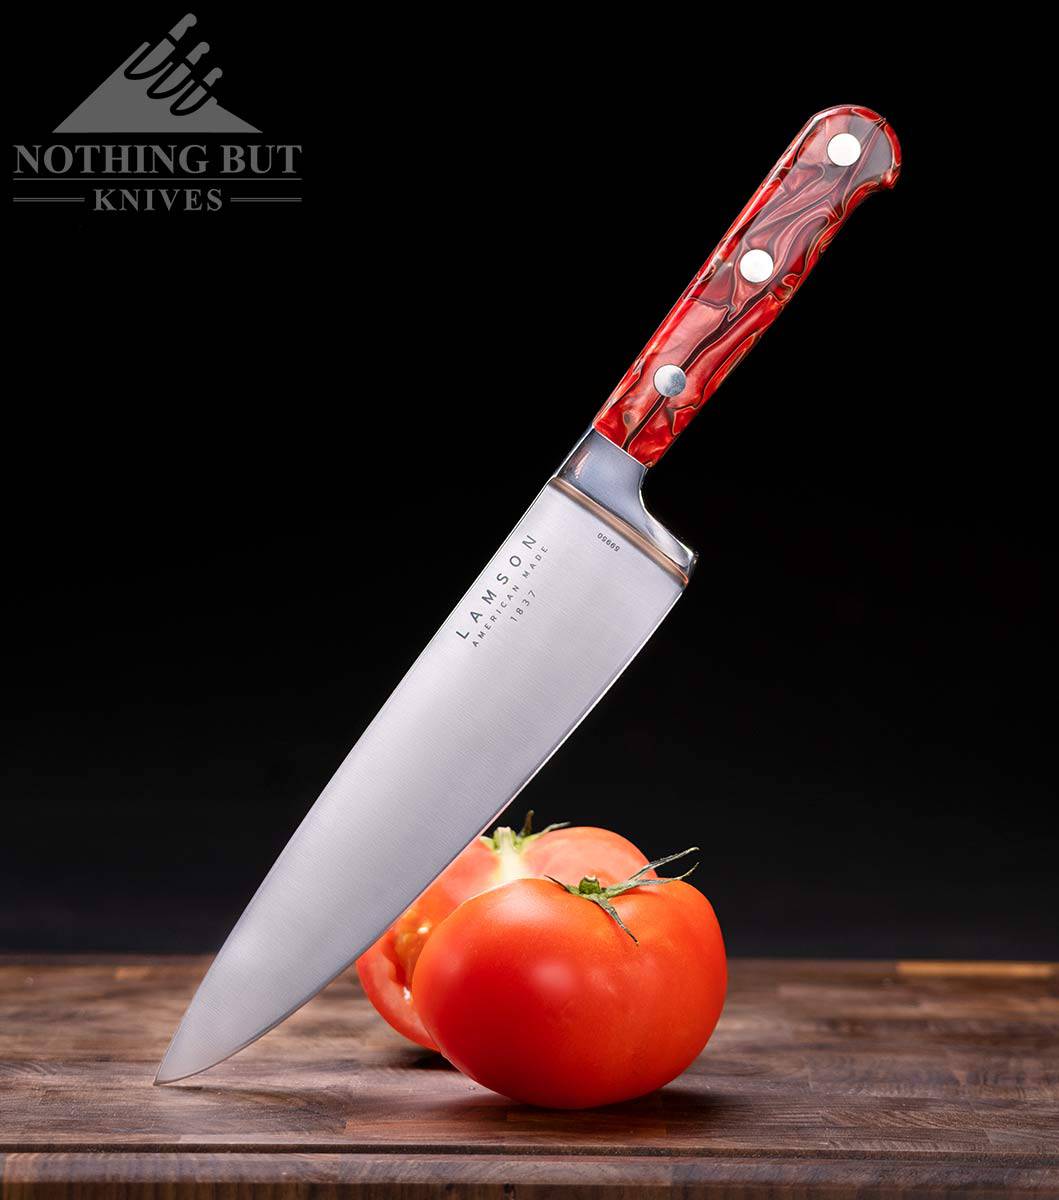 Lamson Fire Premier chef knife on a cutting board with a sliced tomato as part of an in-depth review.